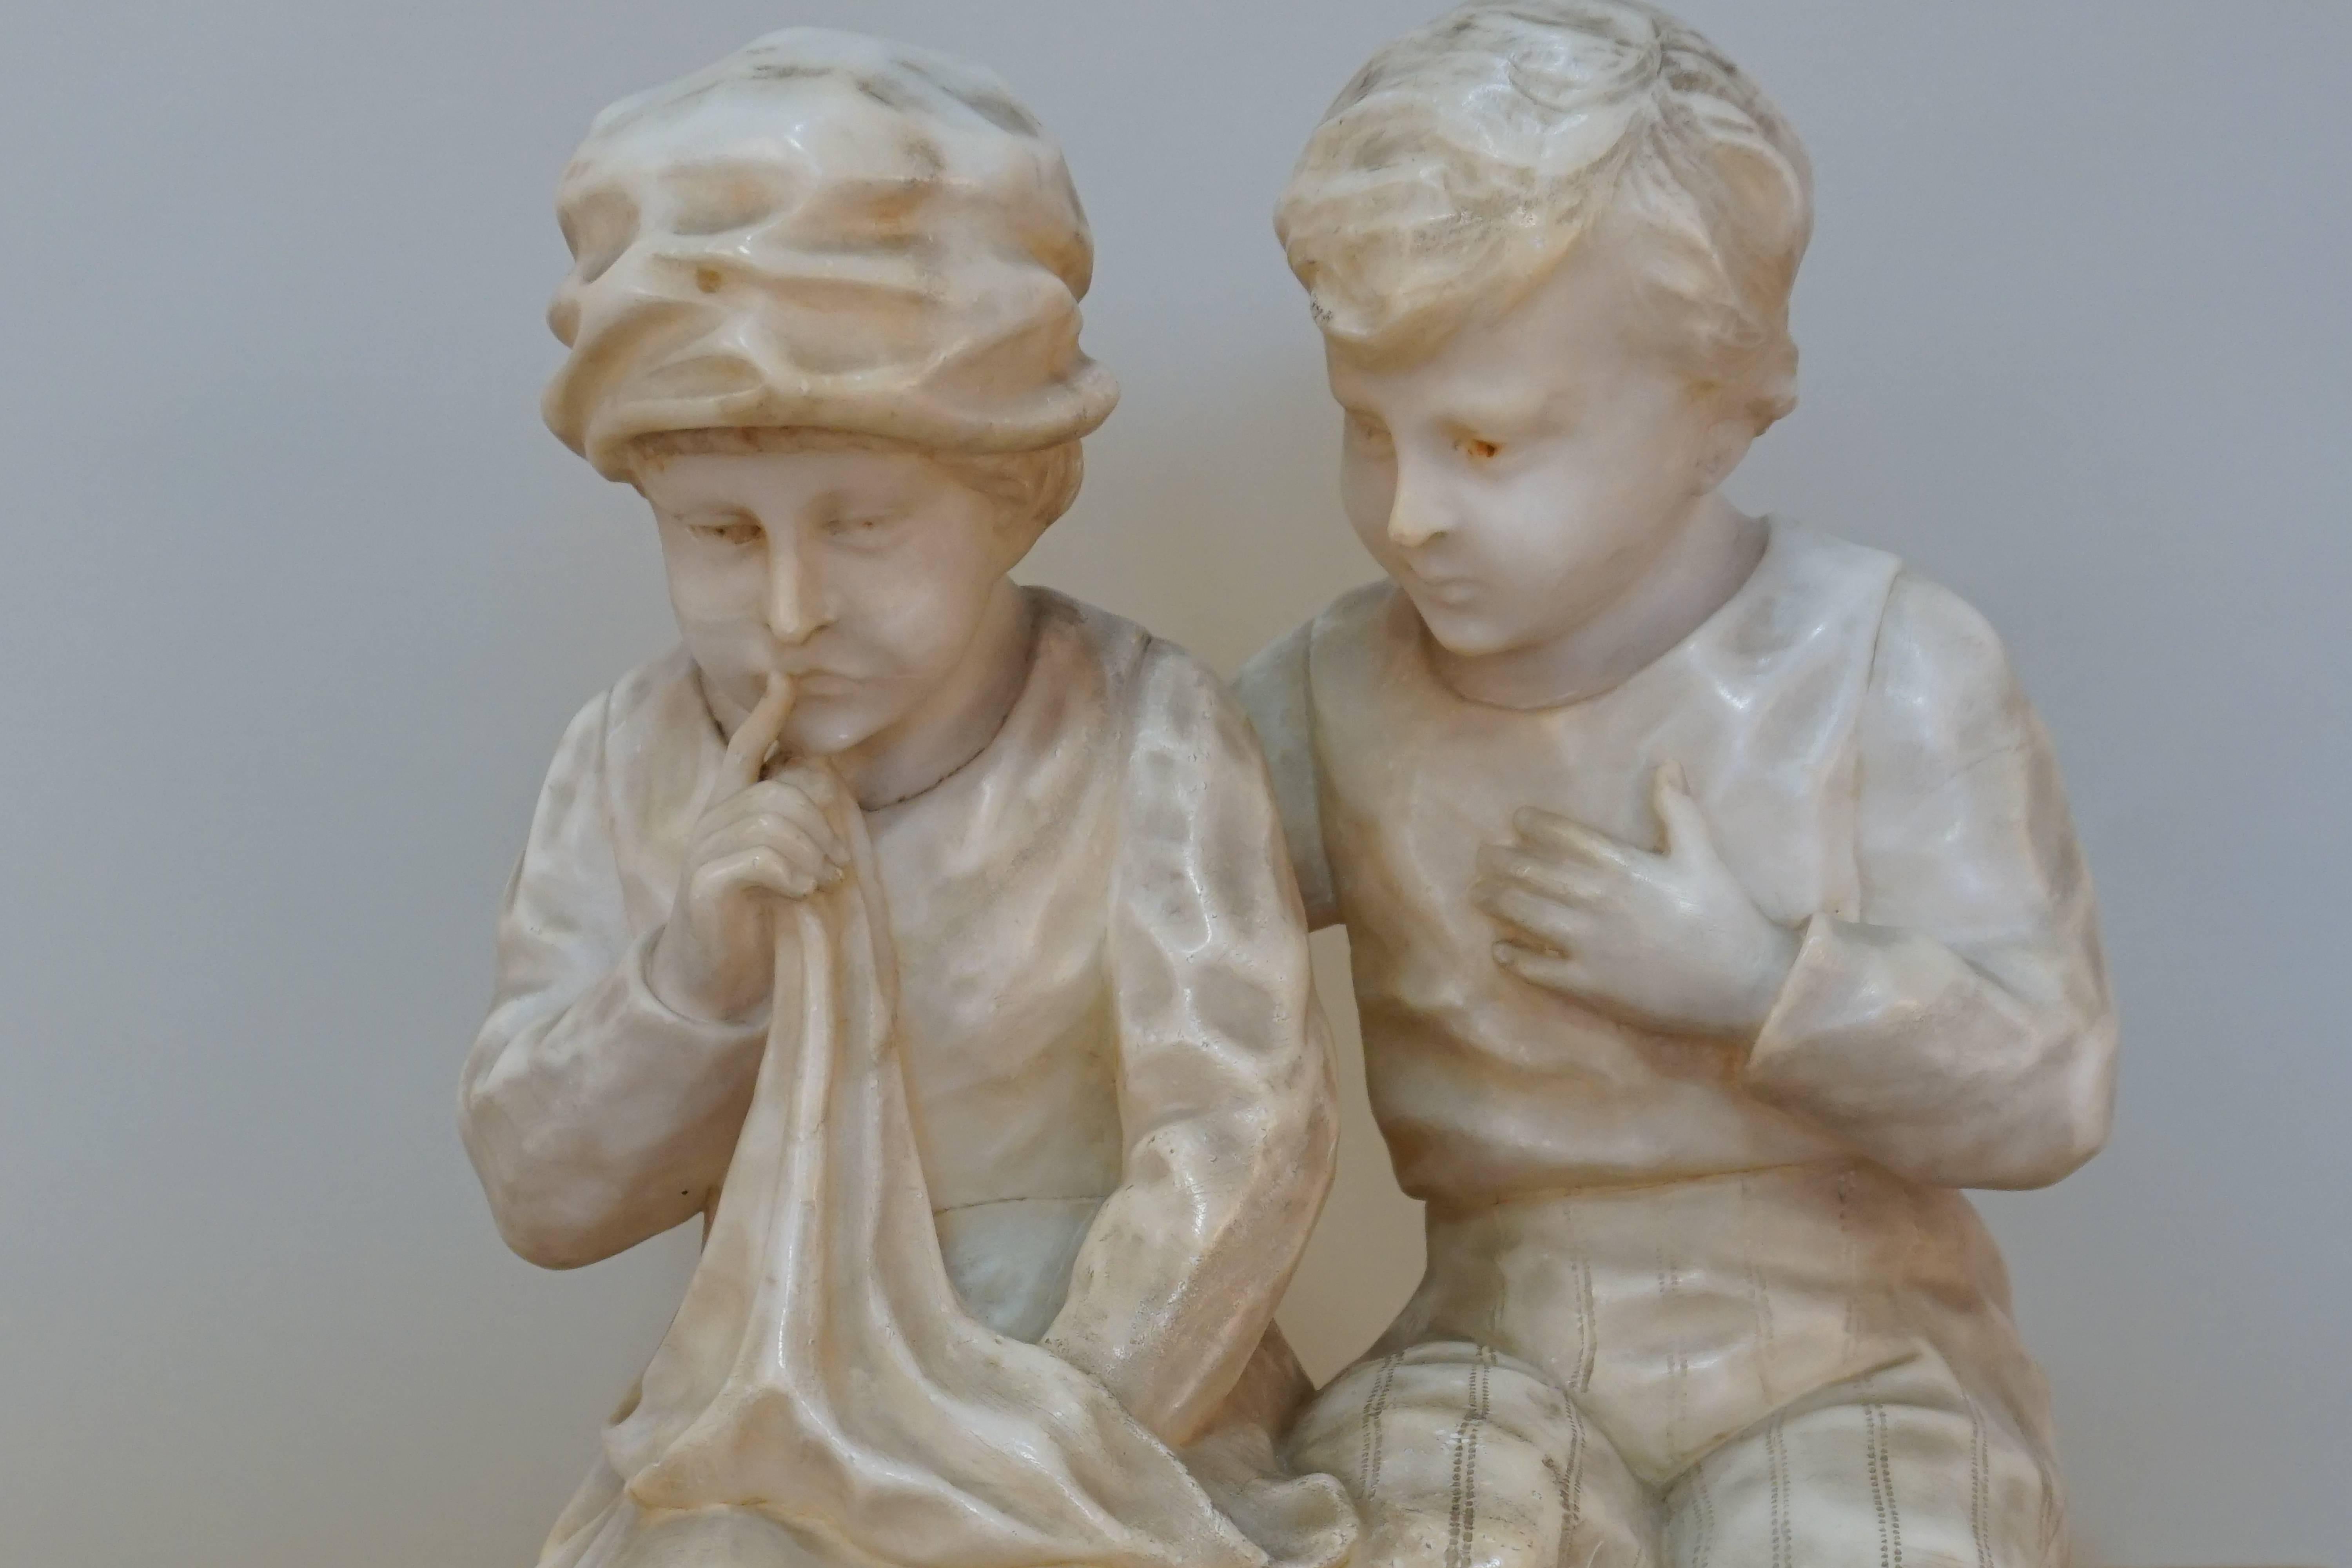 A Dutch style a boy and girl sitting on a bench. Hand-carved marble sculpture.